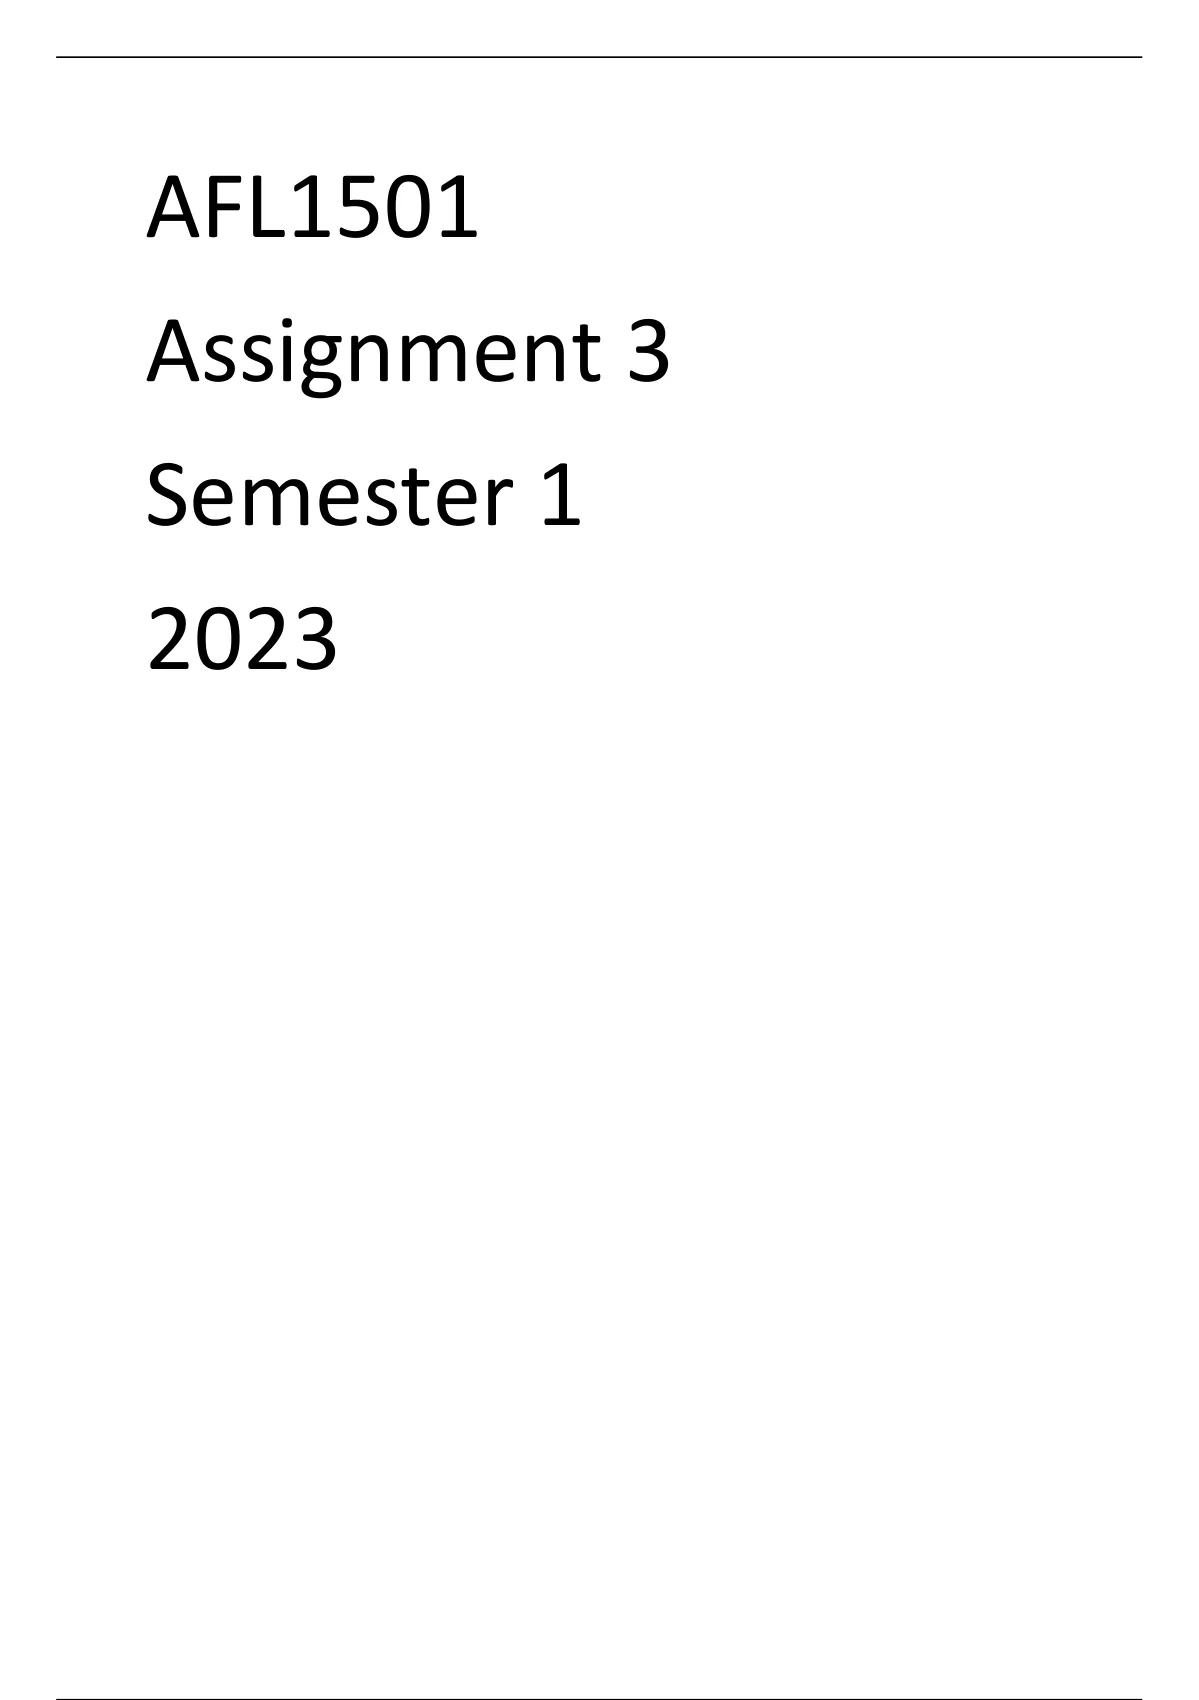 afl1501 assignment 1 2023 answers